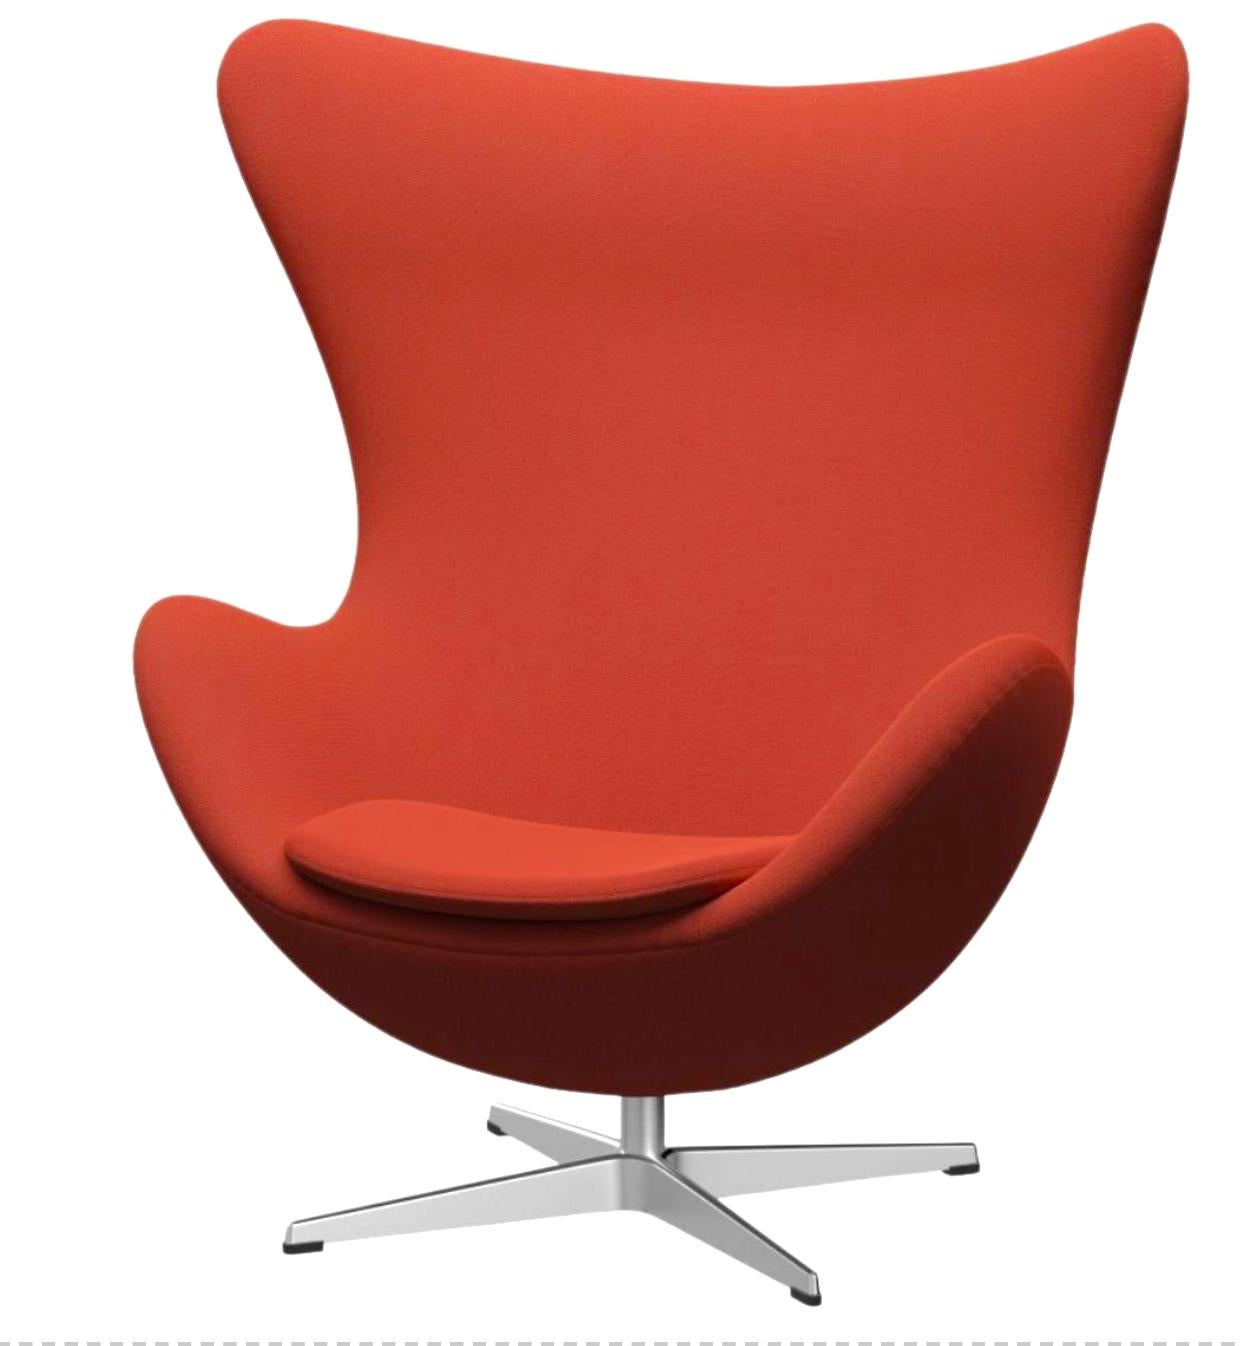 The Egg chair by Arne Jacobsen is masterpiece of Danish design. Jacobsen found the perfect shape for the chair by experimenting with wire and plaster in his garage. Today, the Egg chair is recognized worldwide as one of the triumphs of Jacobsen’s